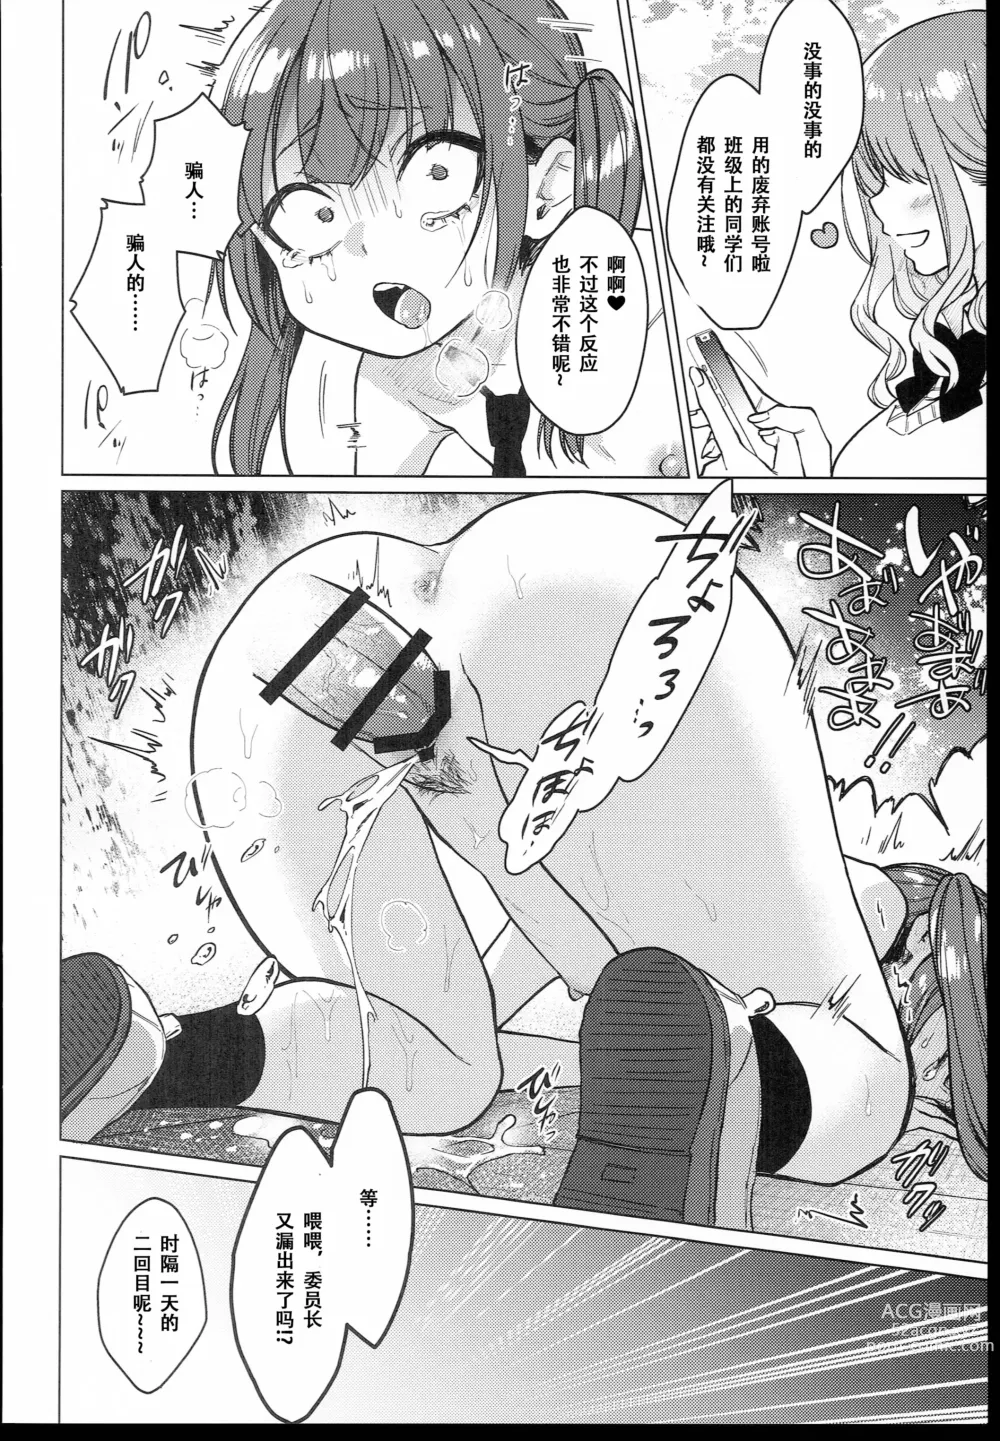 Page 6 of doujinshi 委員長は今日からみんなのオモチャ～終わった学校生活編～